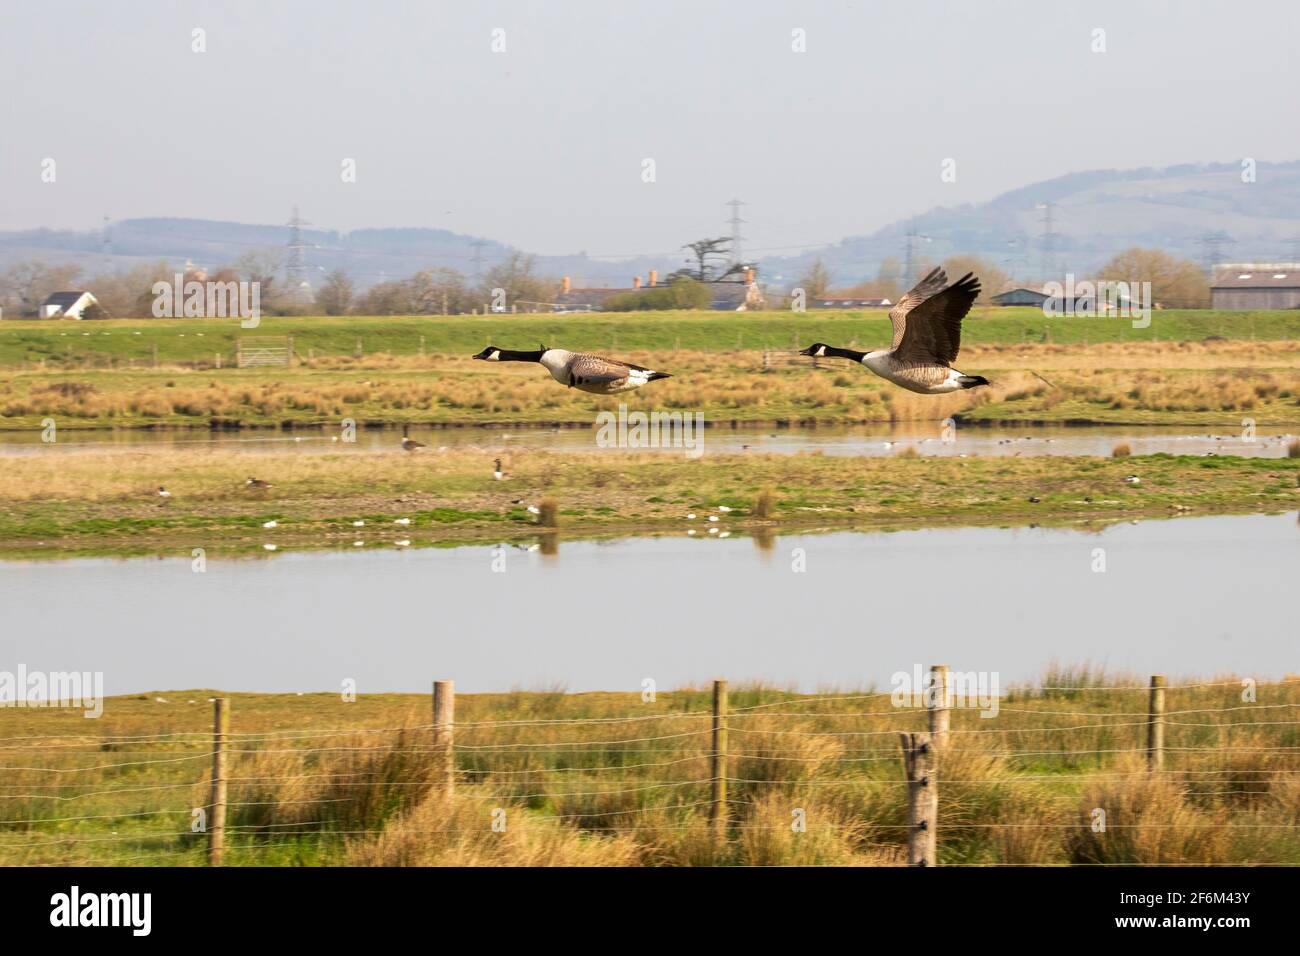 Two Canadian geese flying over the agricultural wetlands of Newport. Stock Photo